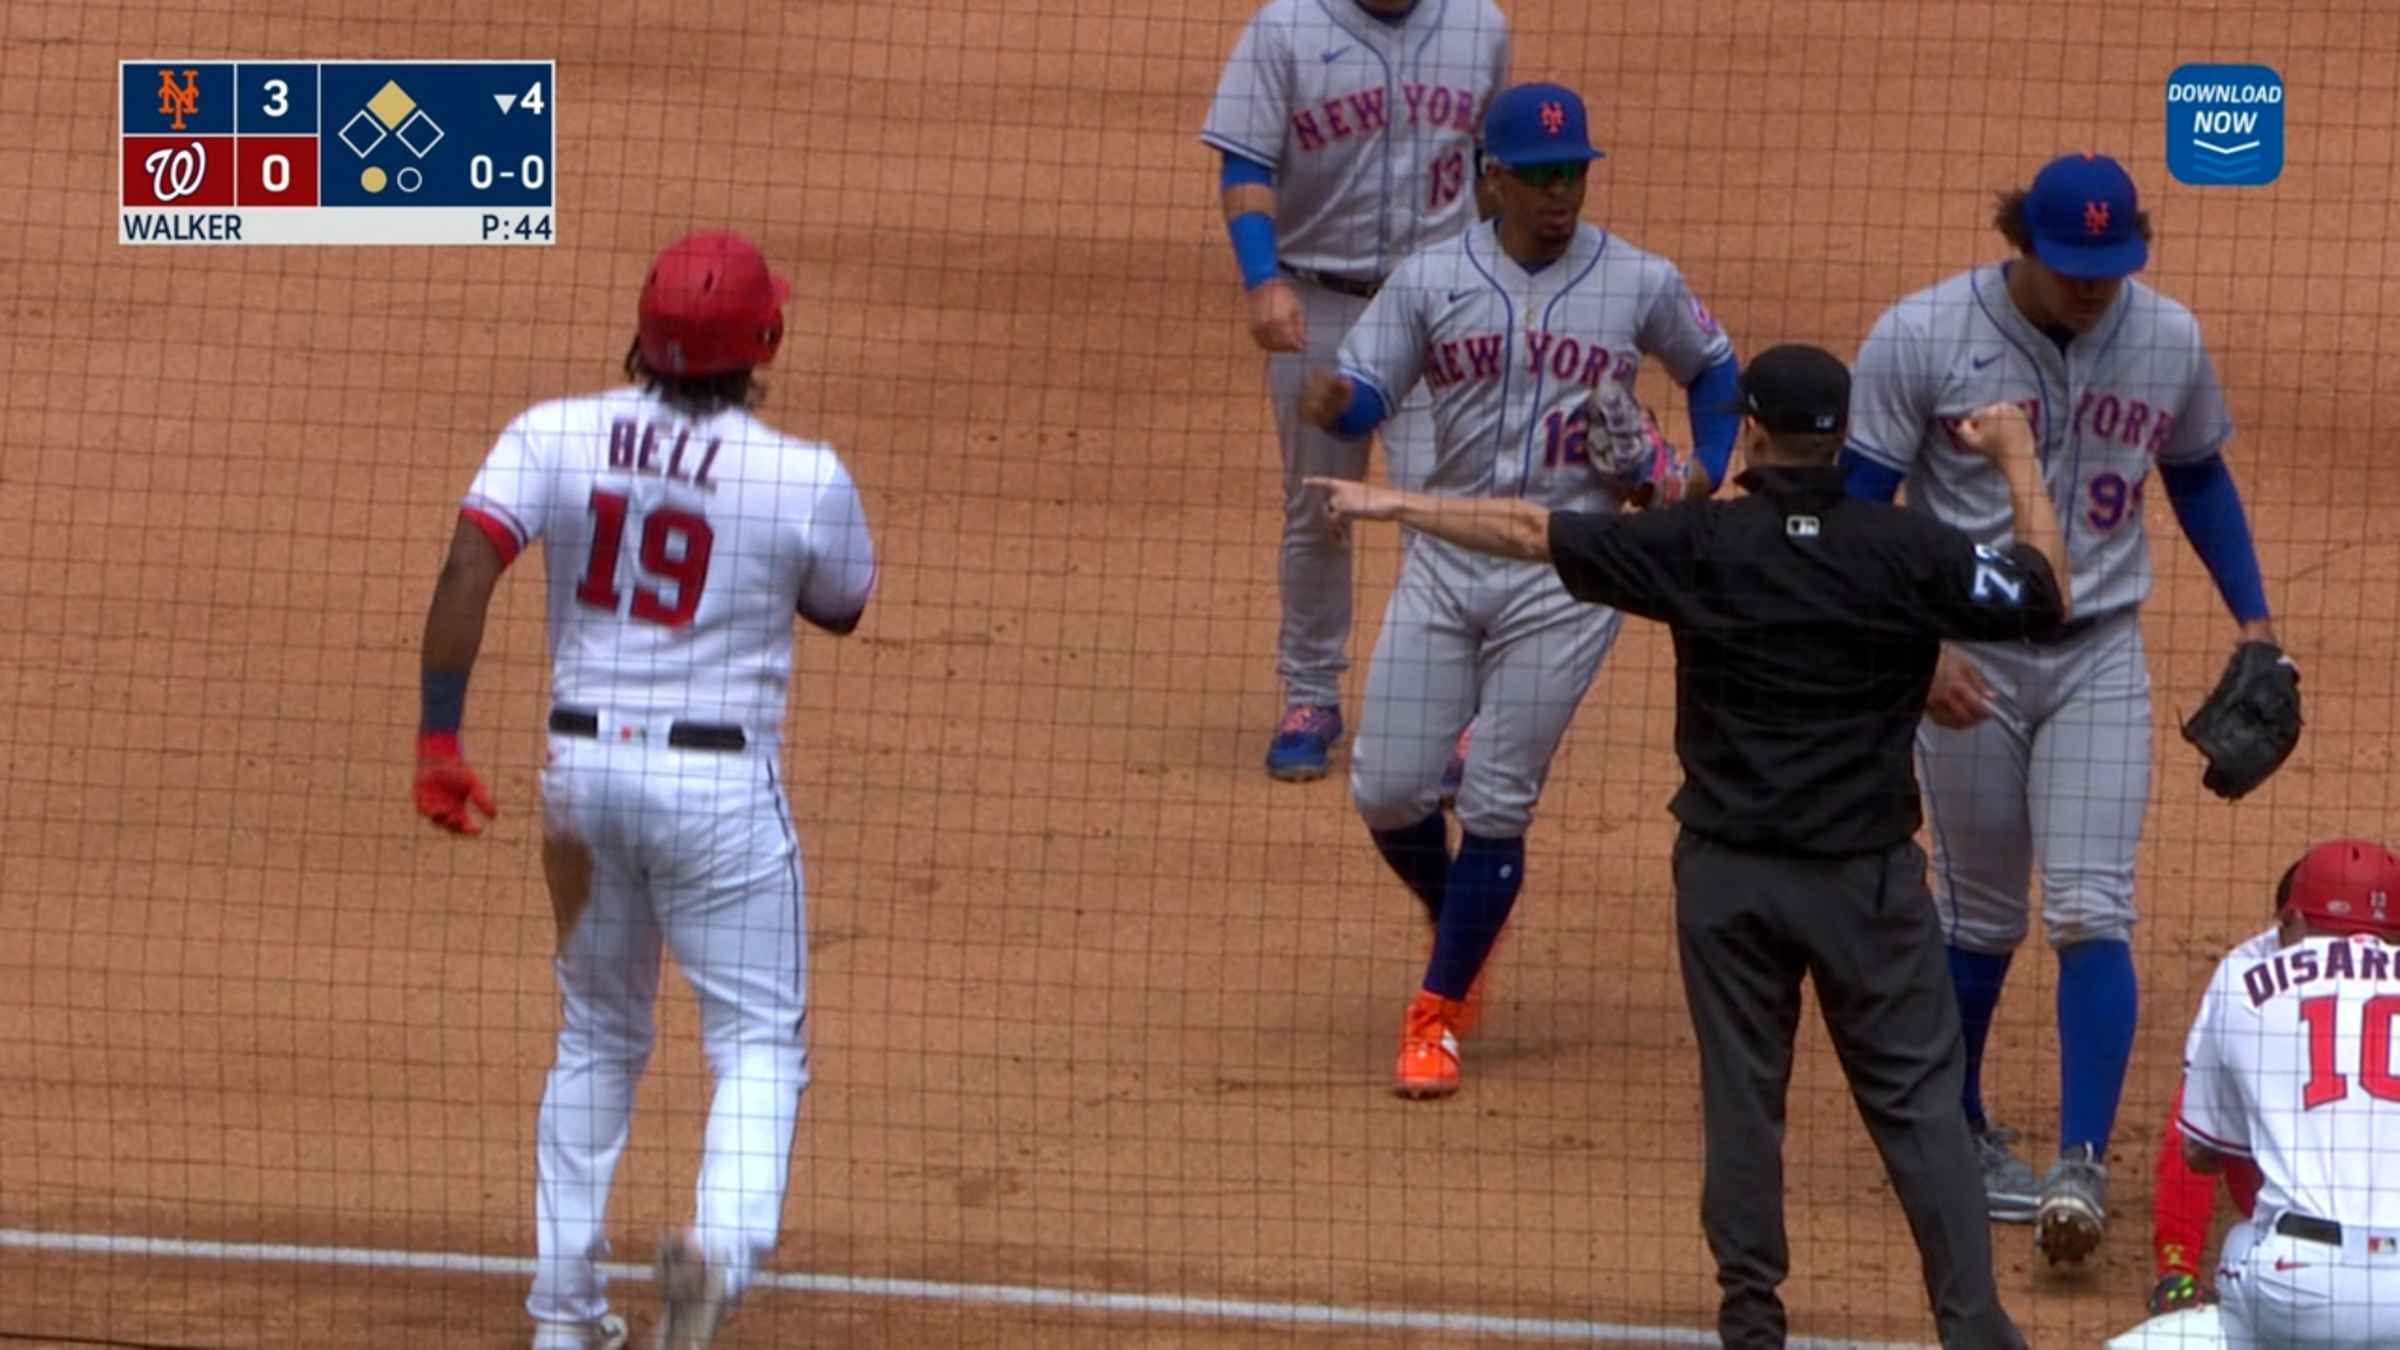 Mets Baserunner Pulled Off a Beautiful Move to Avoid Double Play